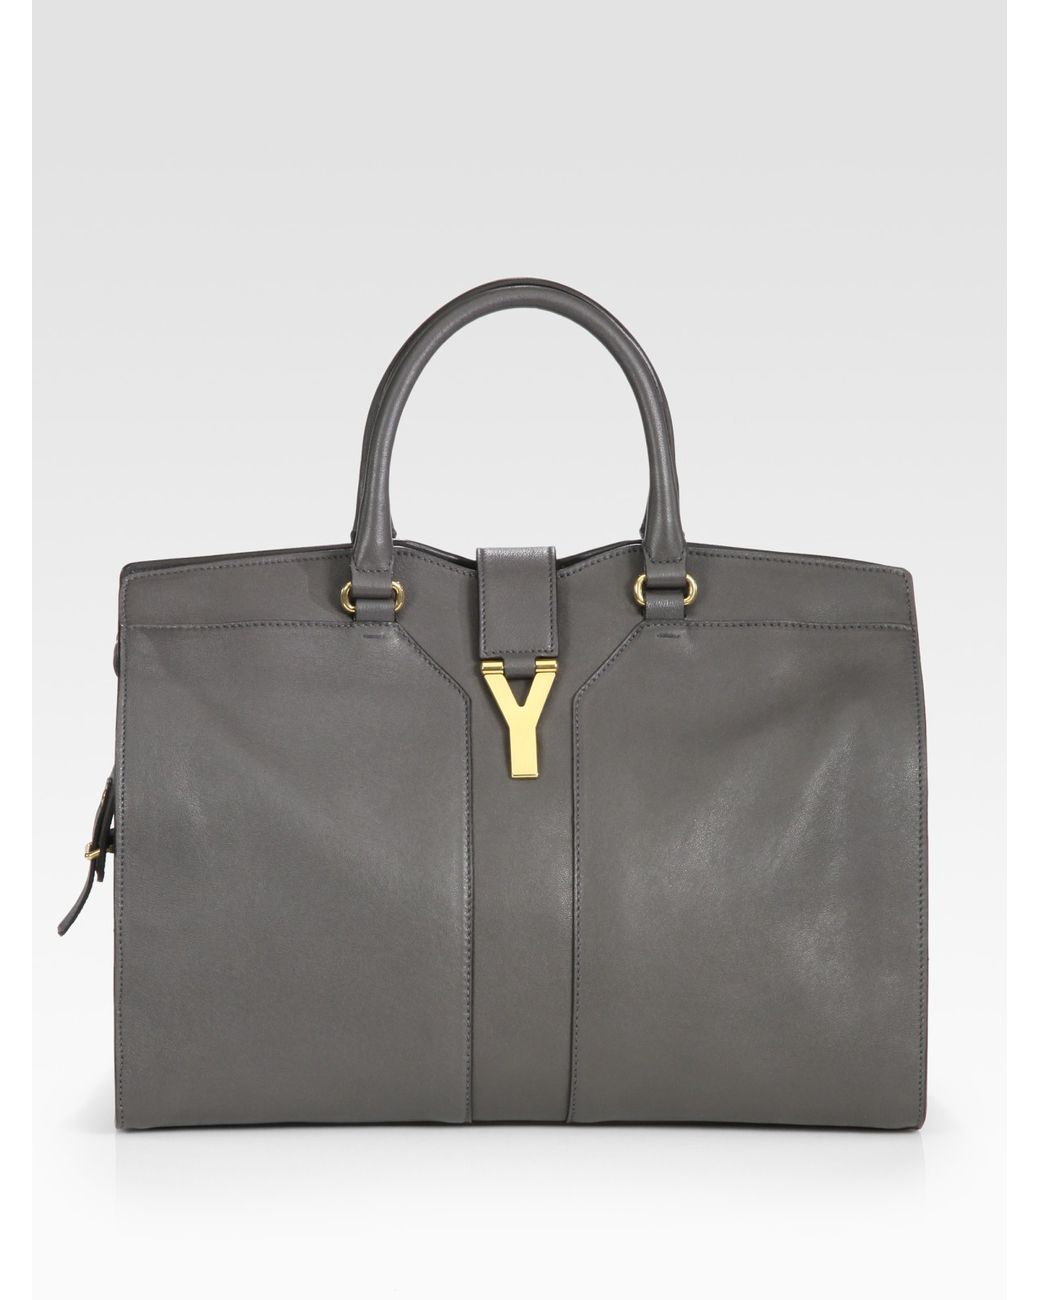 Saint Laurent Ysl Cabas Chyc Large Leather East West Bag in Gray | Lyst